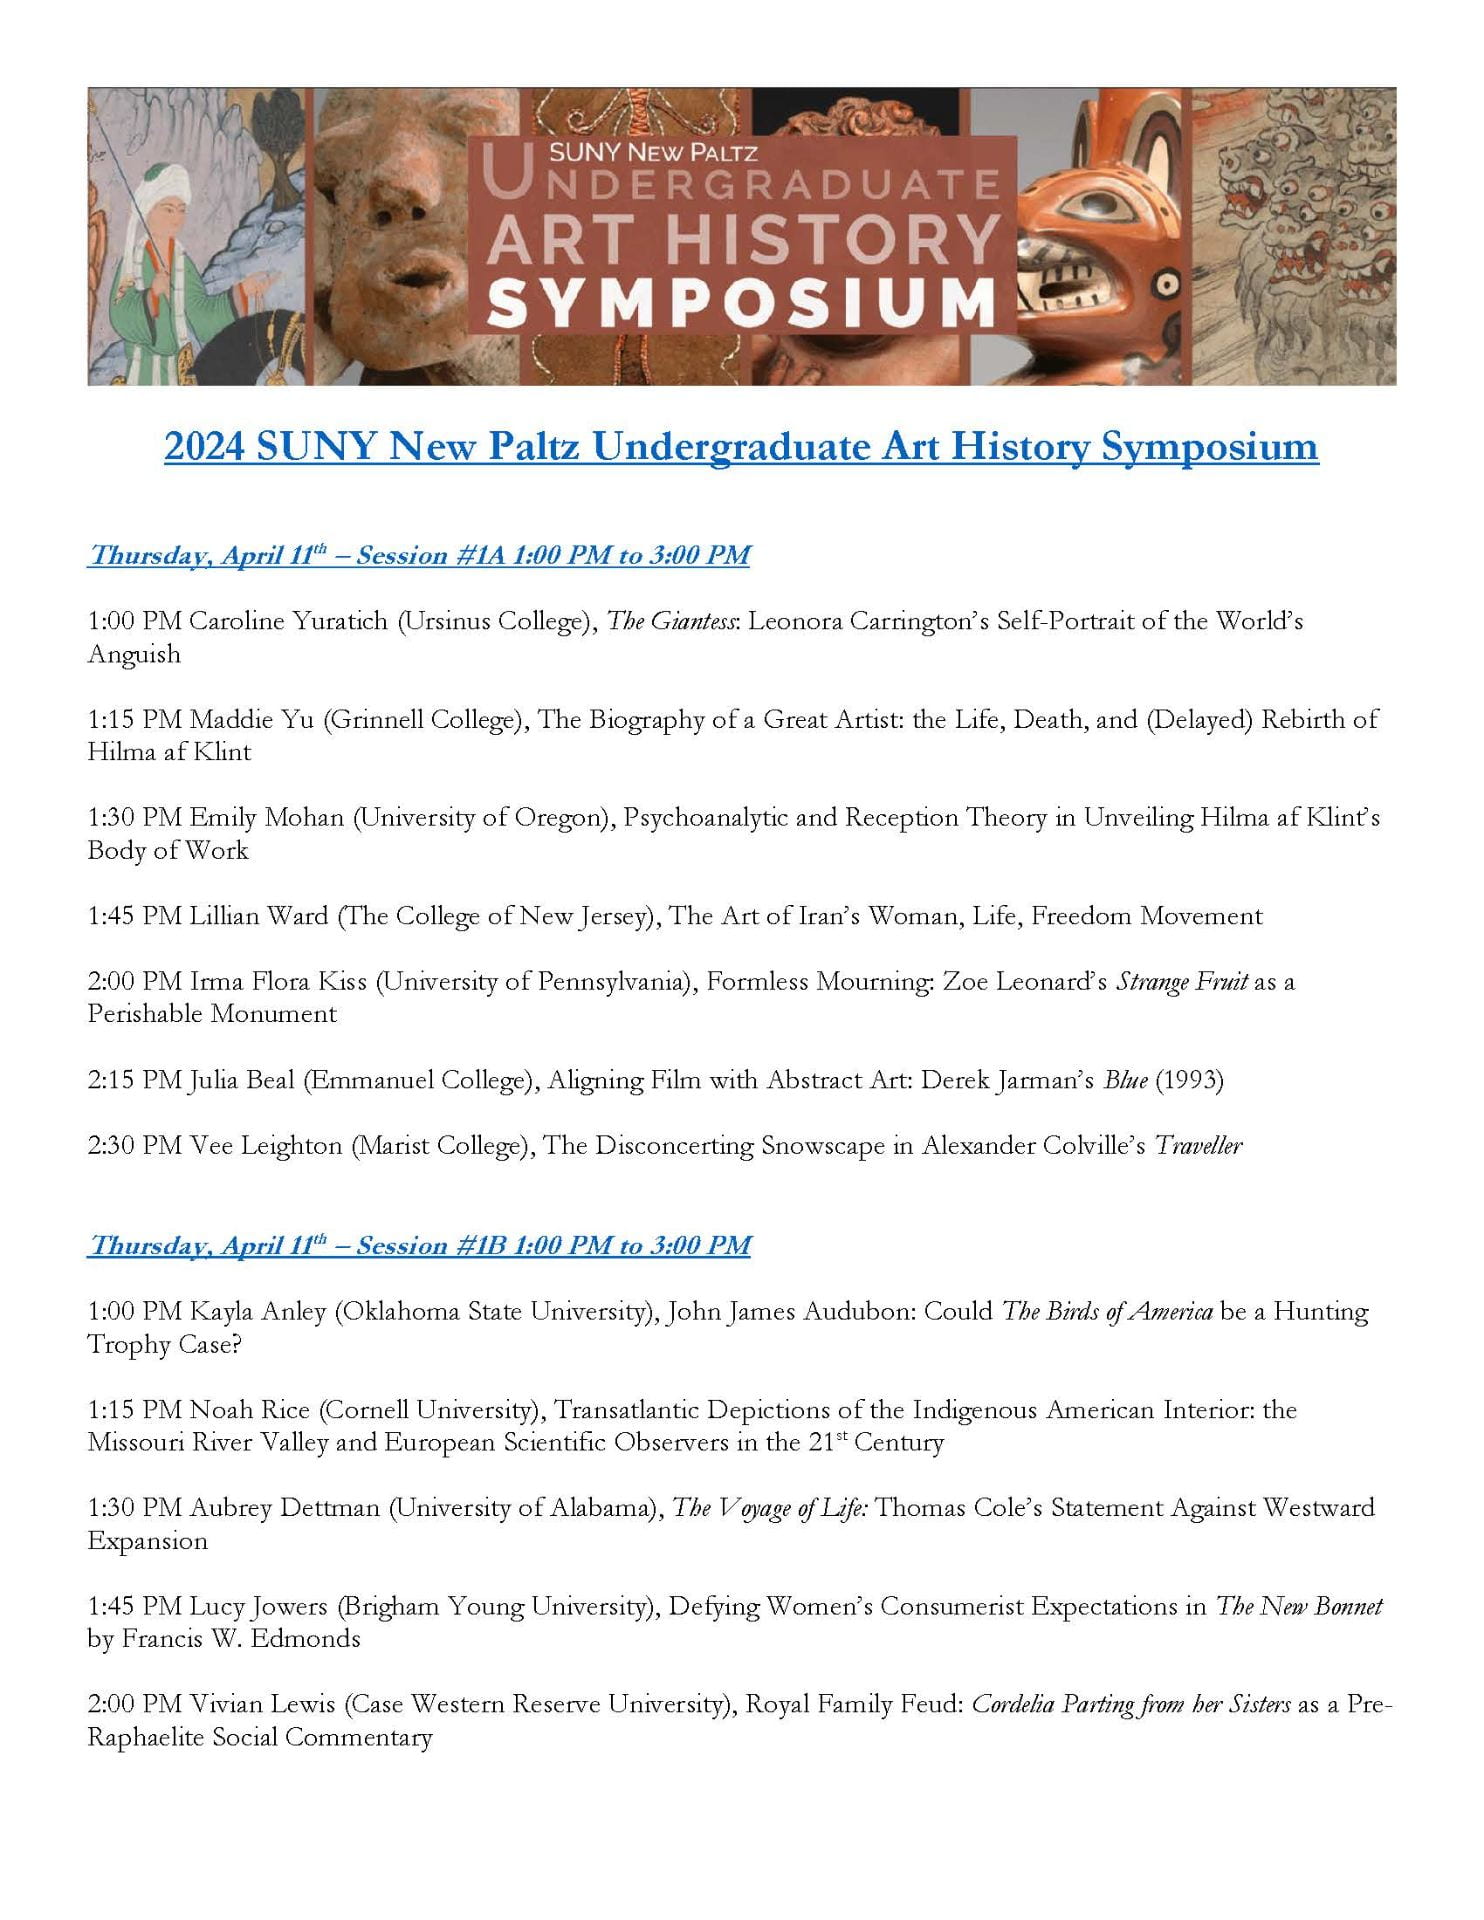 Page 1 of the 2024 Symposium Schedule